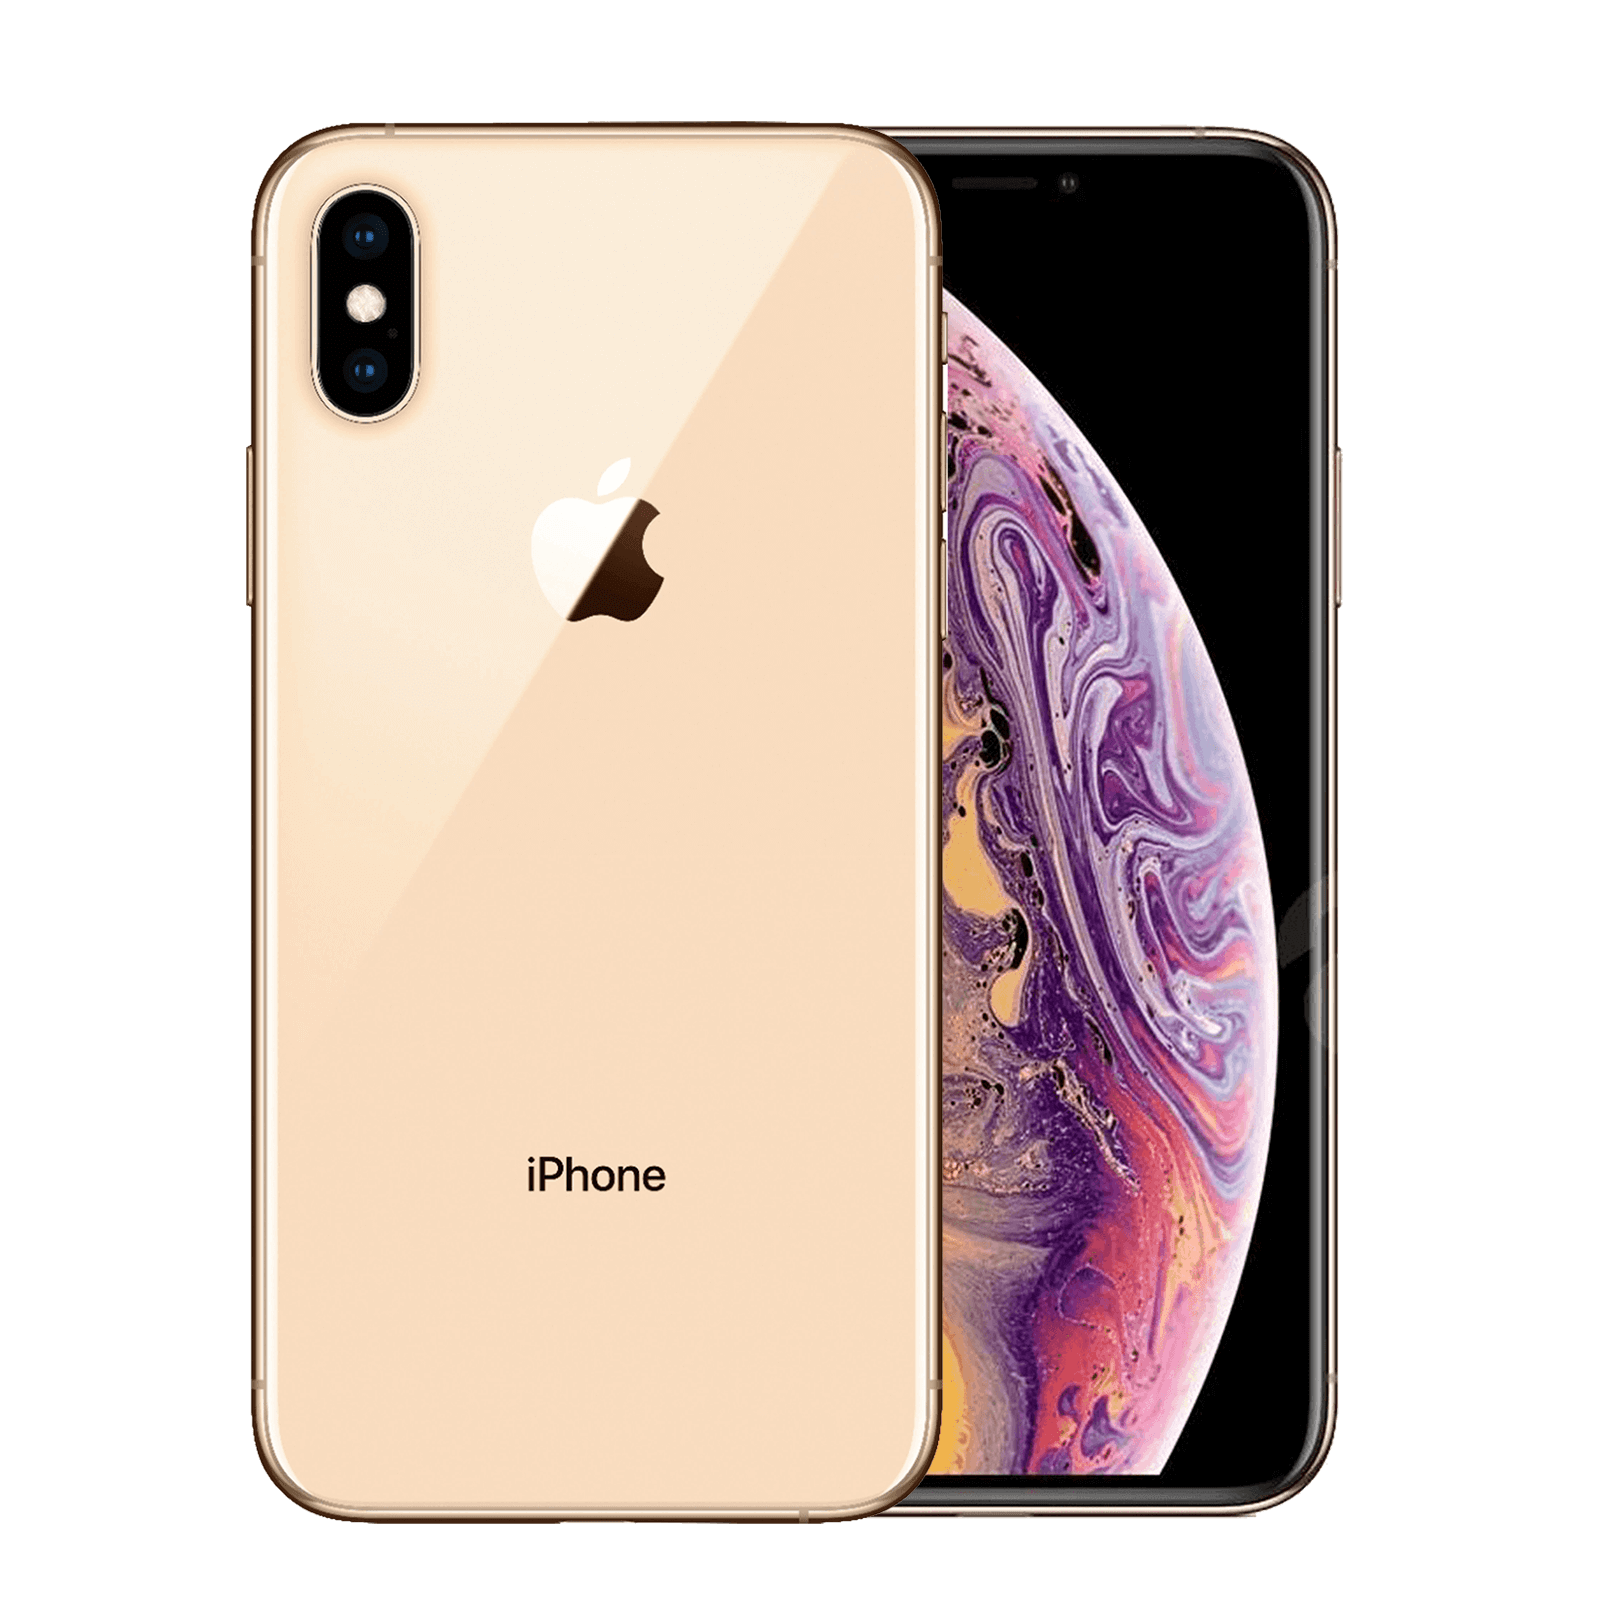 Apple iPhone XS Max 256GB Gold Good - T-Mobile